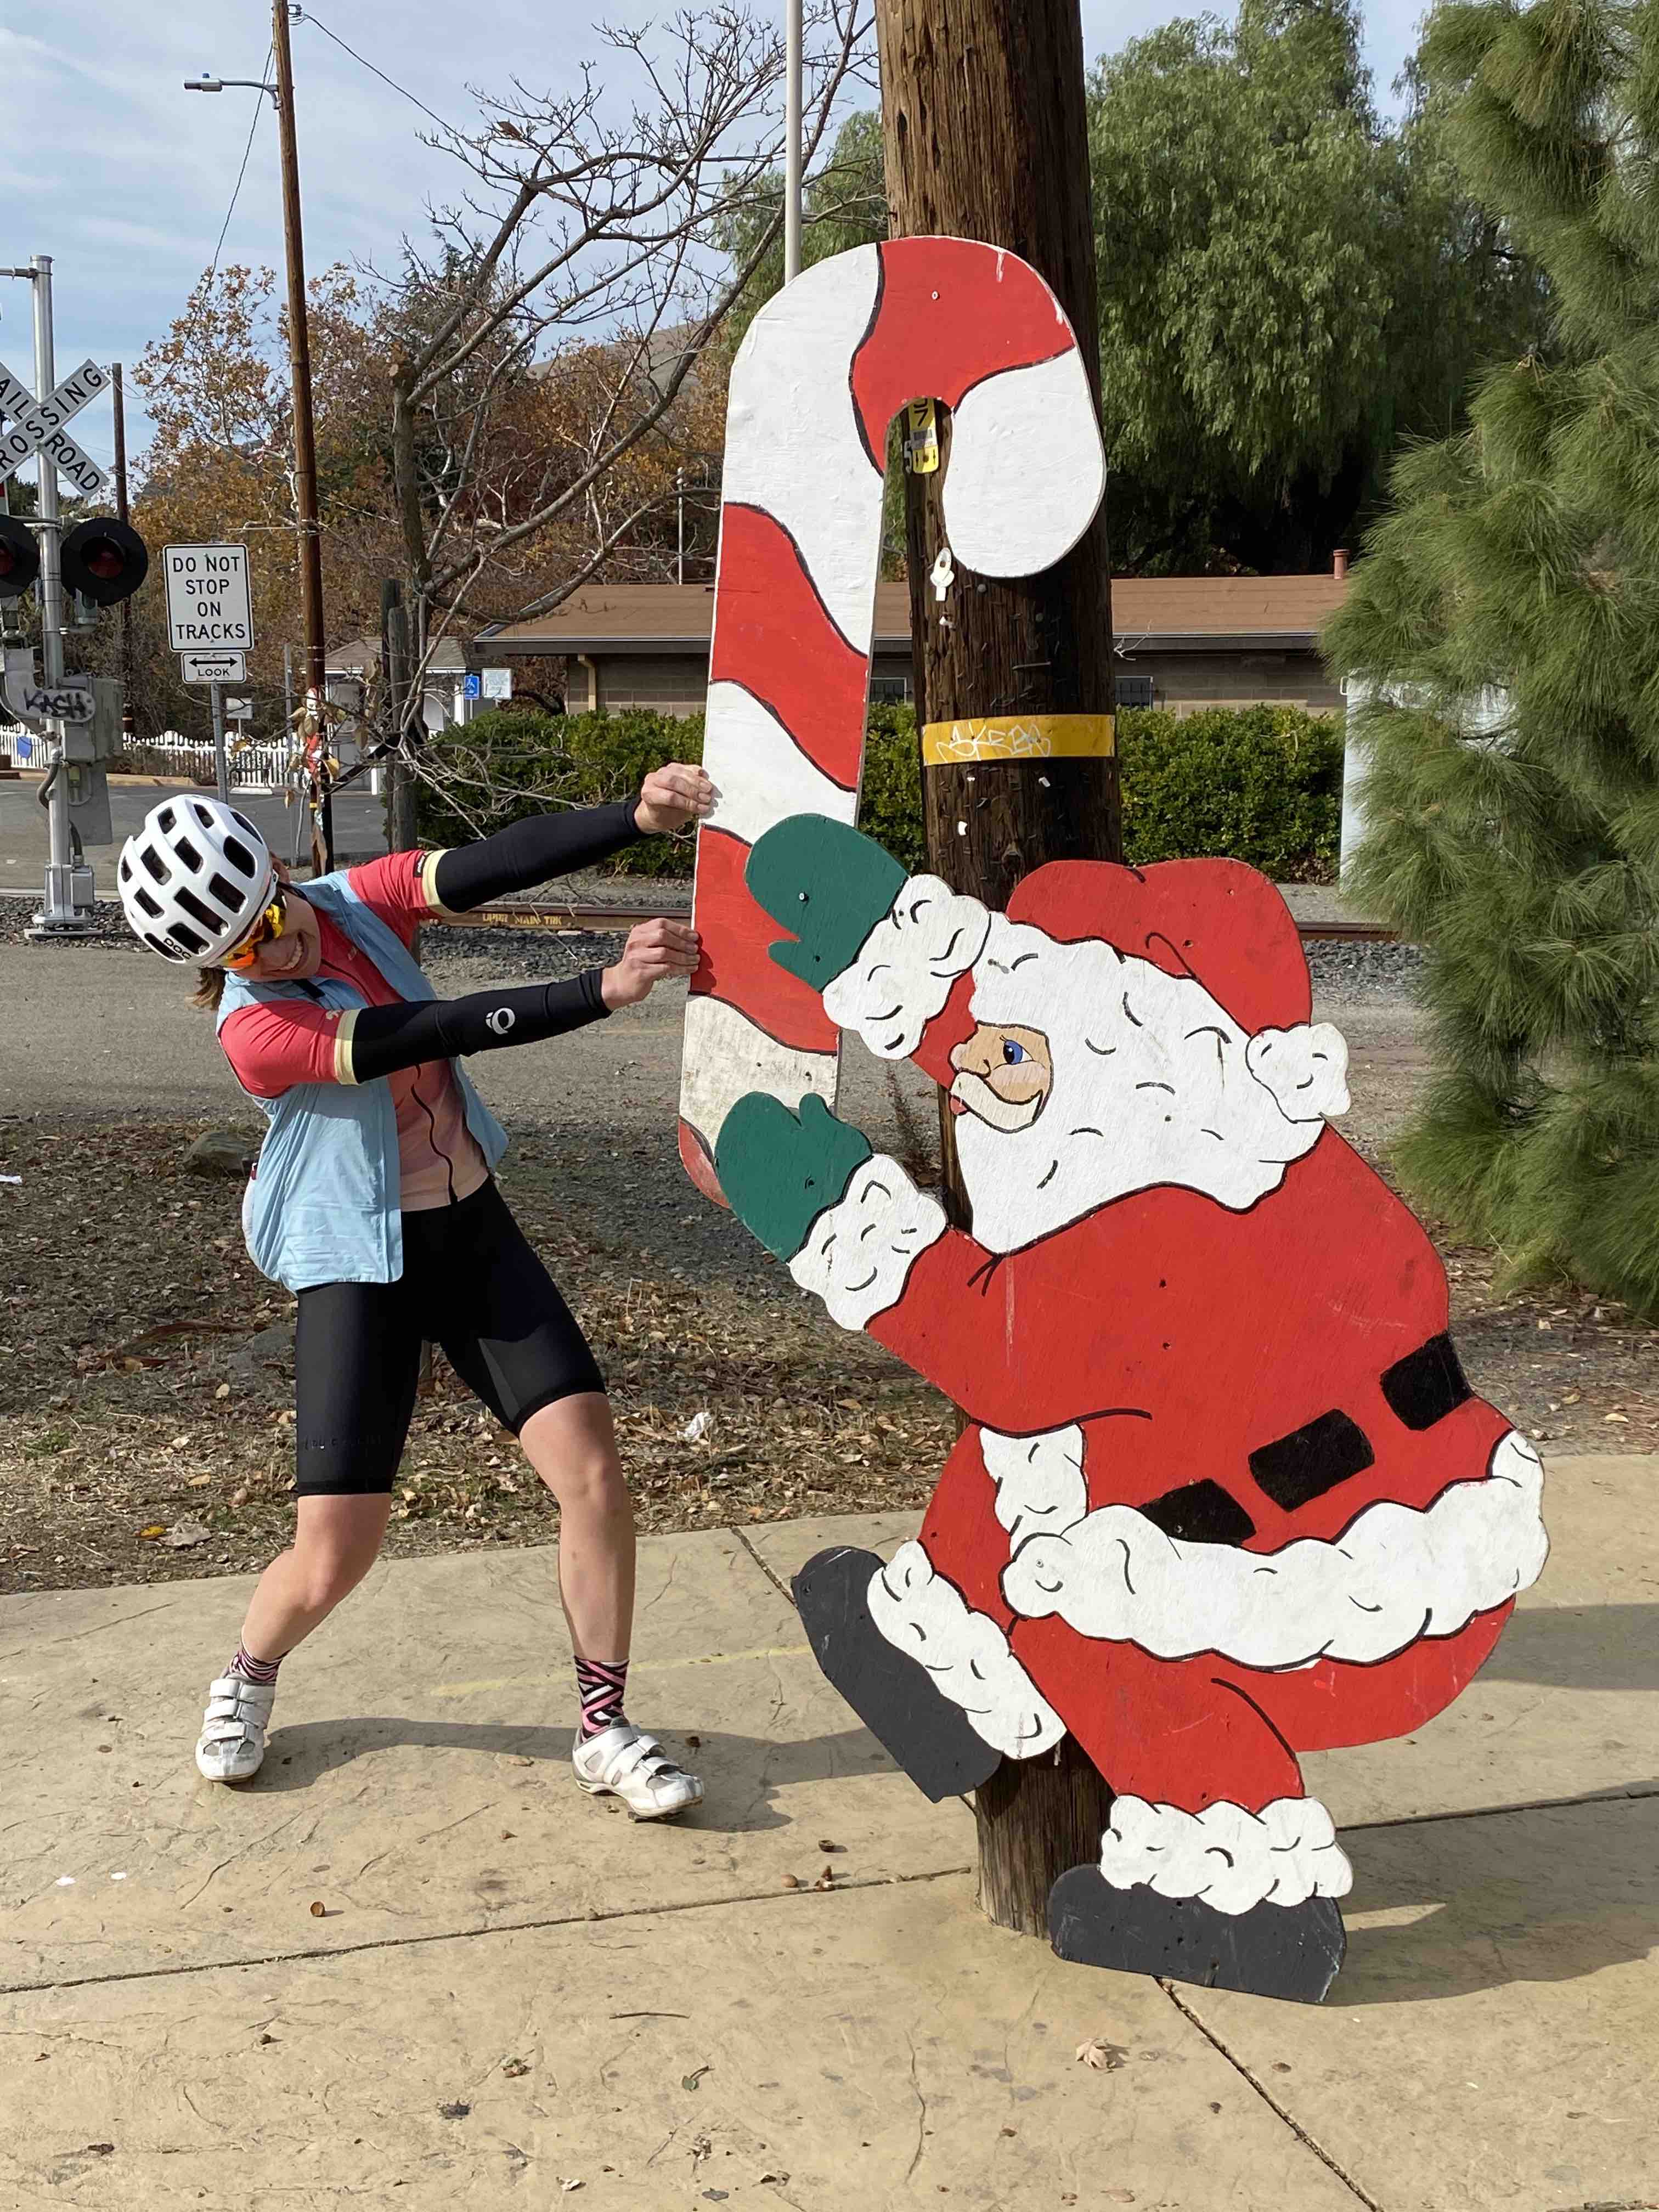 Cyclist playing tug of war with Santa Claus over a candy cane near Sunol, California